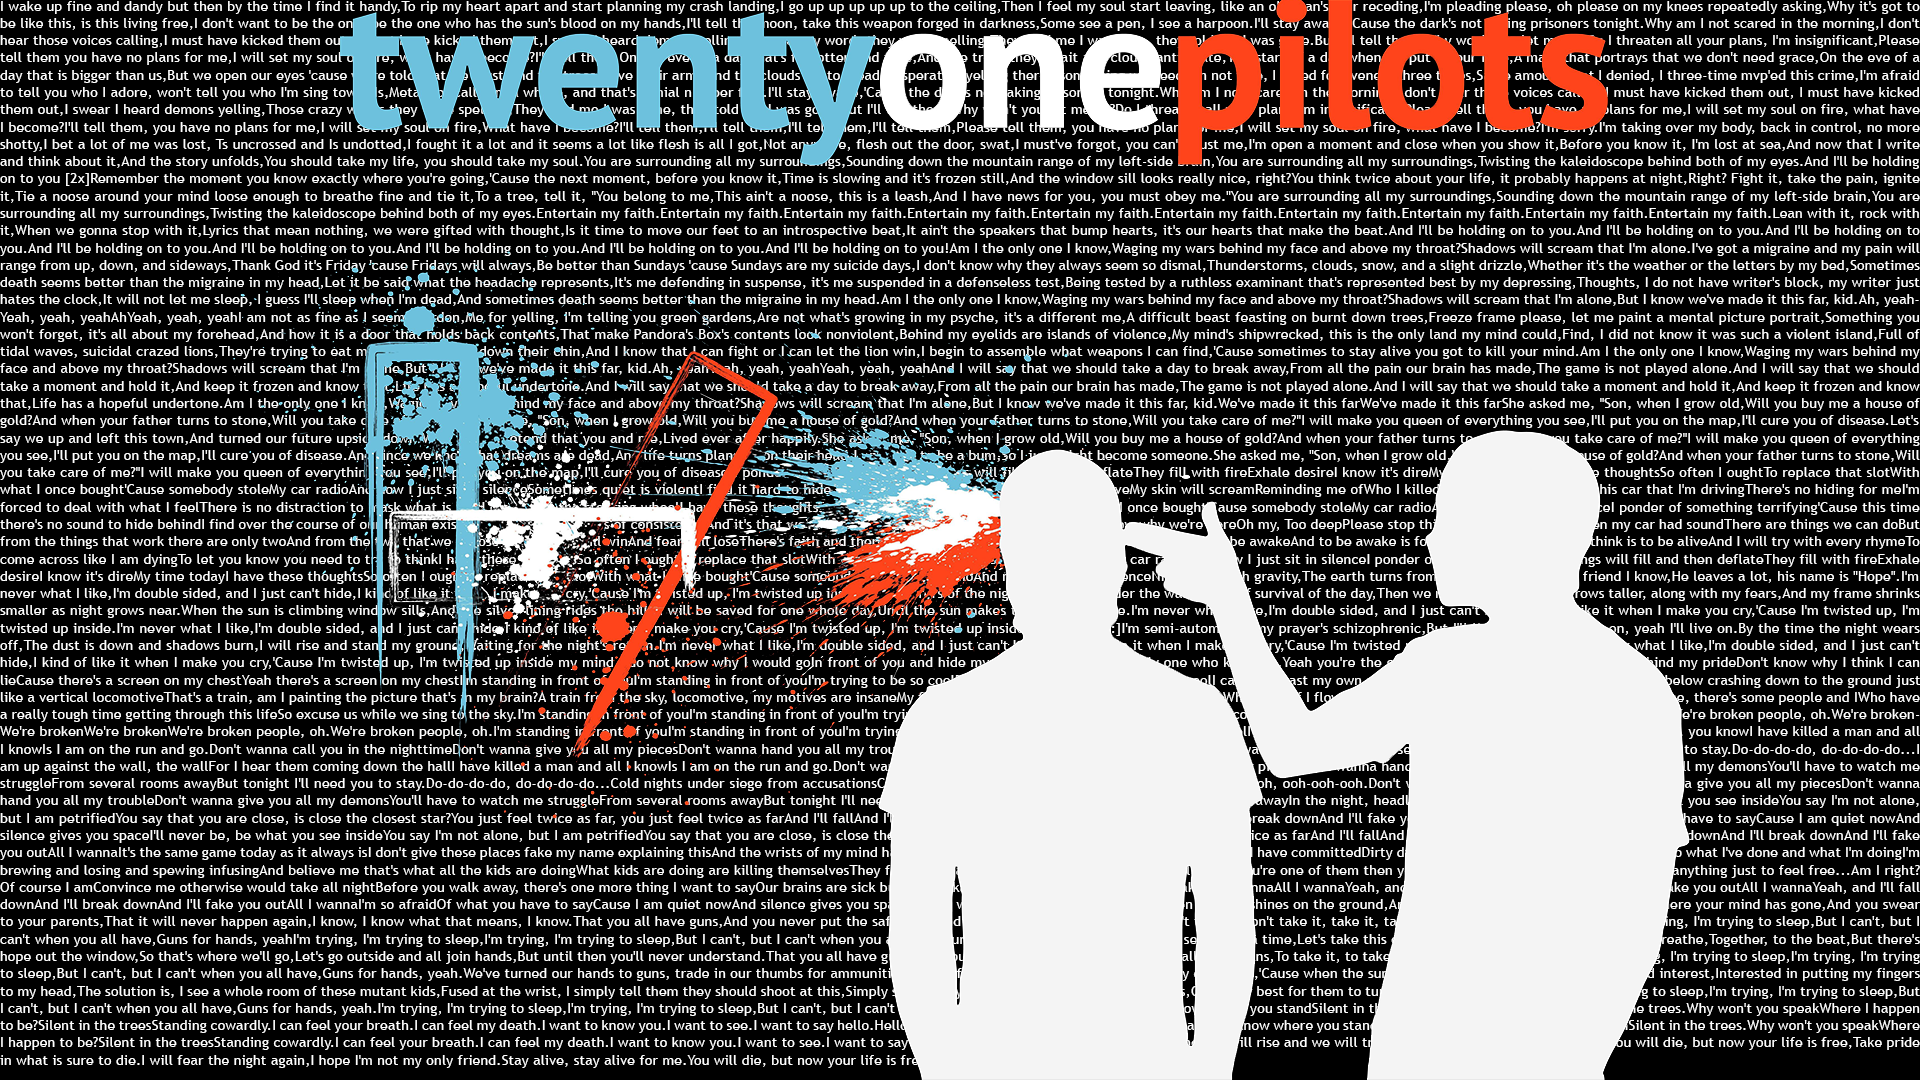 HD desktop wallpaper featuring Twenty One Pilots with silhouette graphics and their logo on a text-filled background.